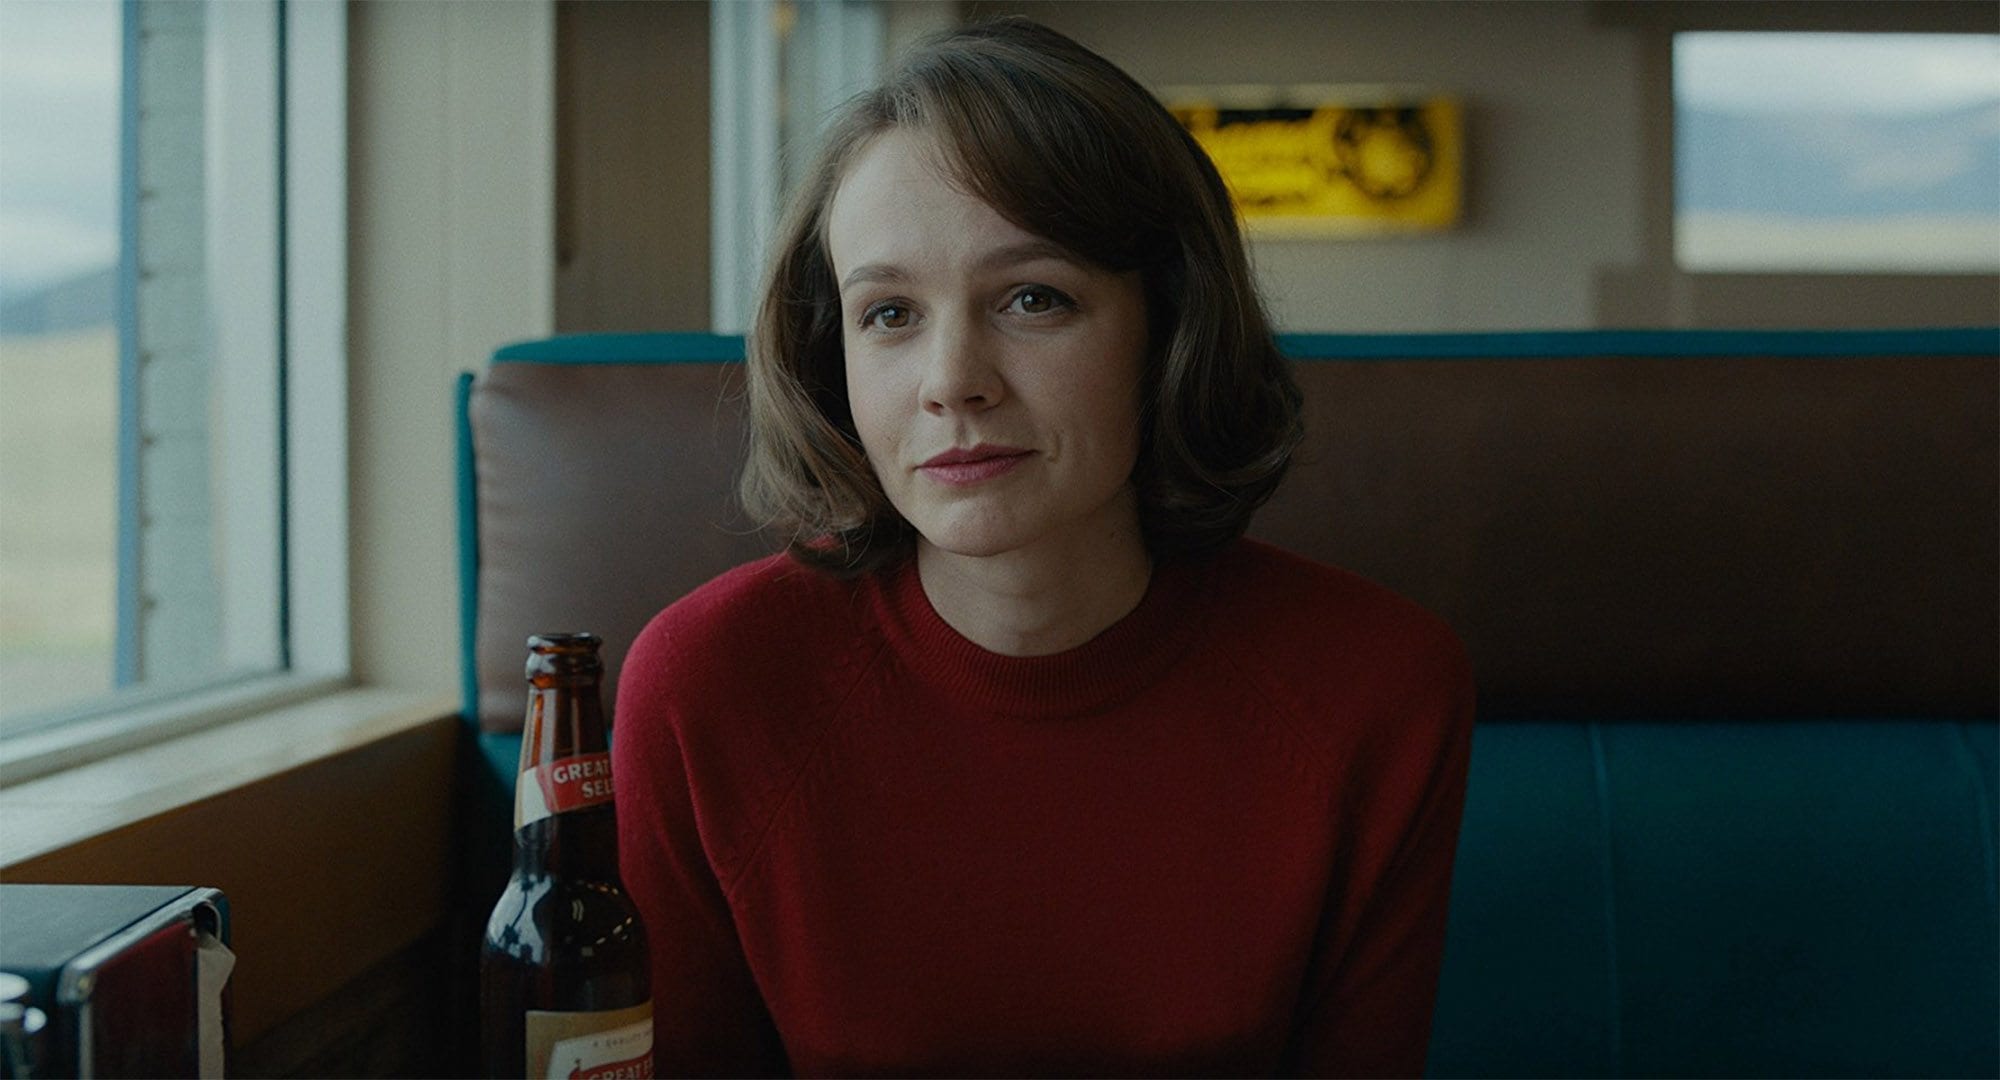 Following a successful run at both Sundance Film Festival and Cannes 2018, actor and breakout director Paul Dano’s family drama 'Wildlife' has released its debut trailer. With so many features headed to the big screen in the next few months, you’ll surely be kept busy until the release of 'Wildlife' rolls around.